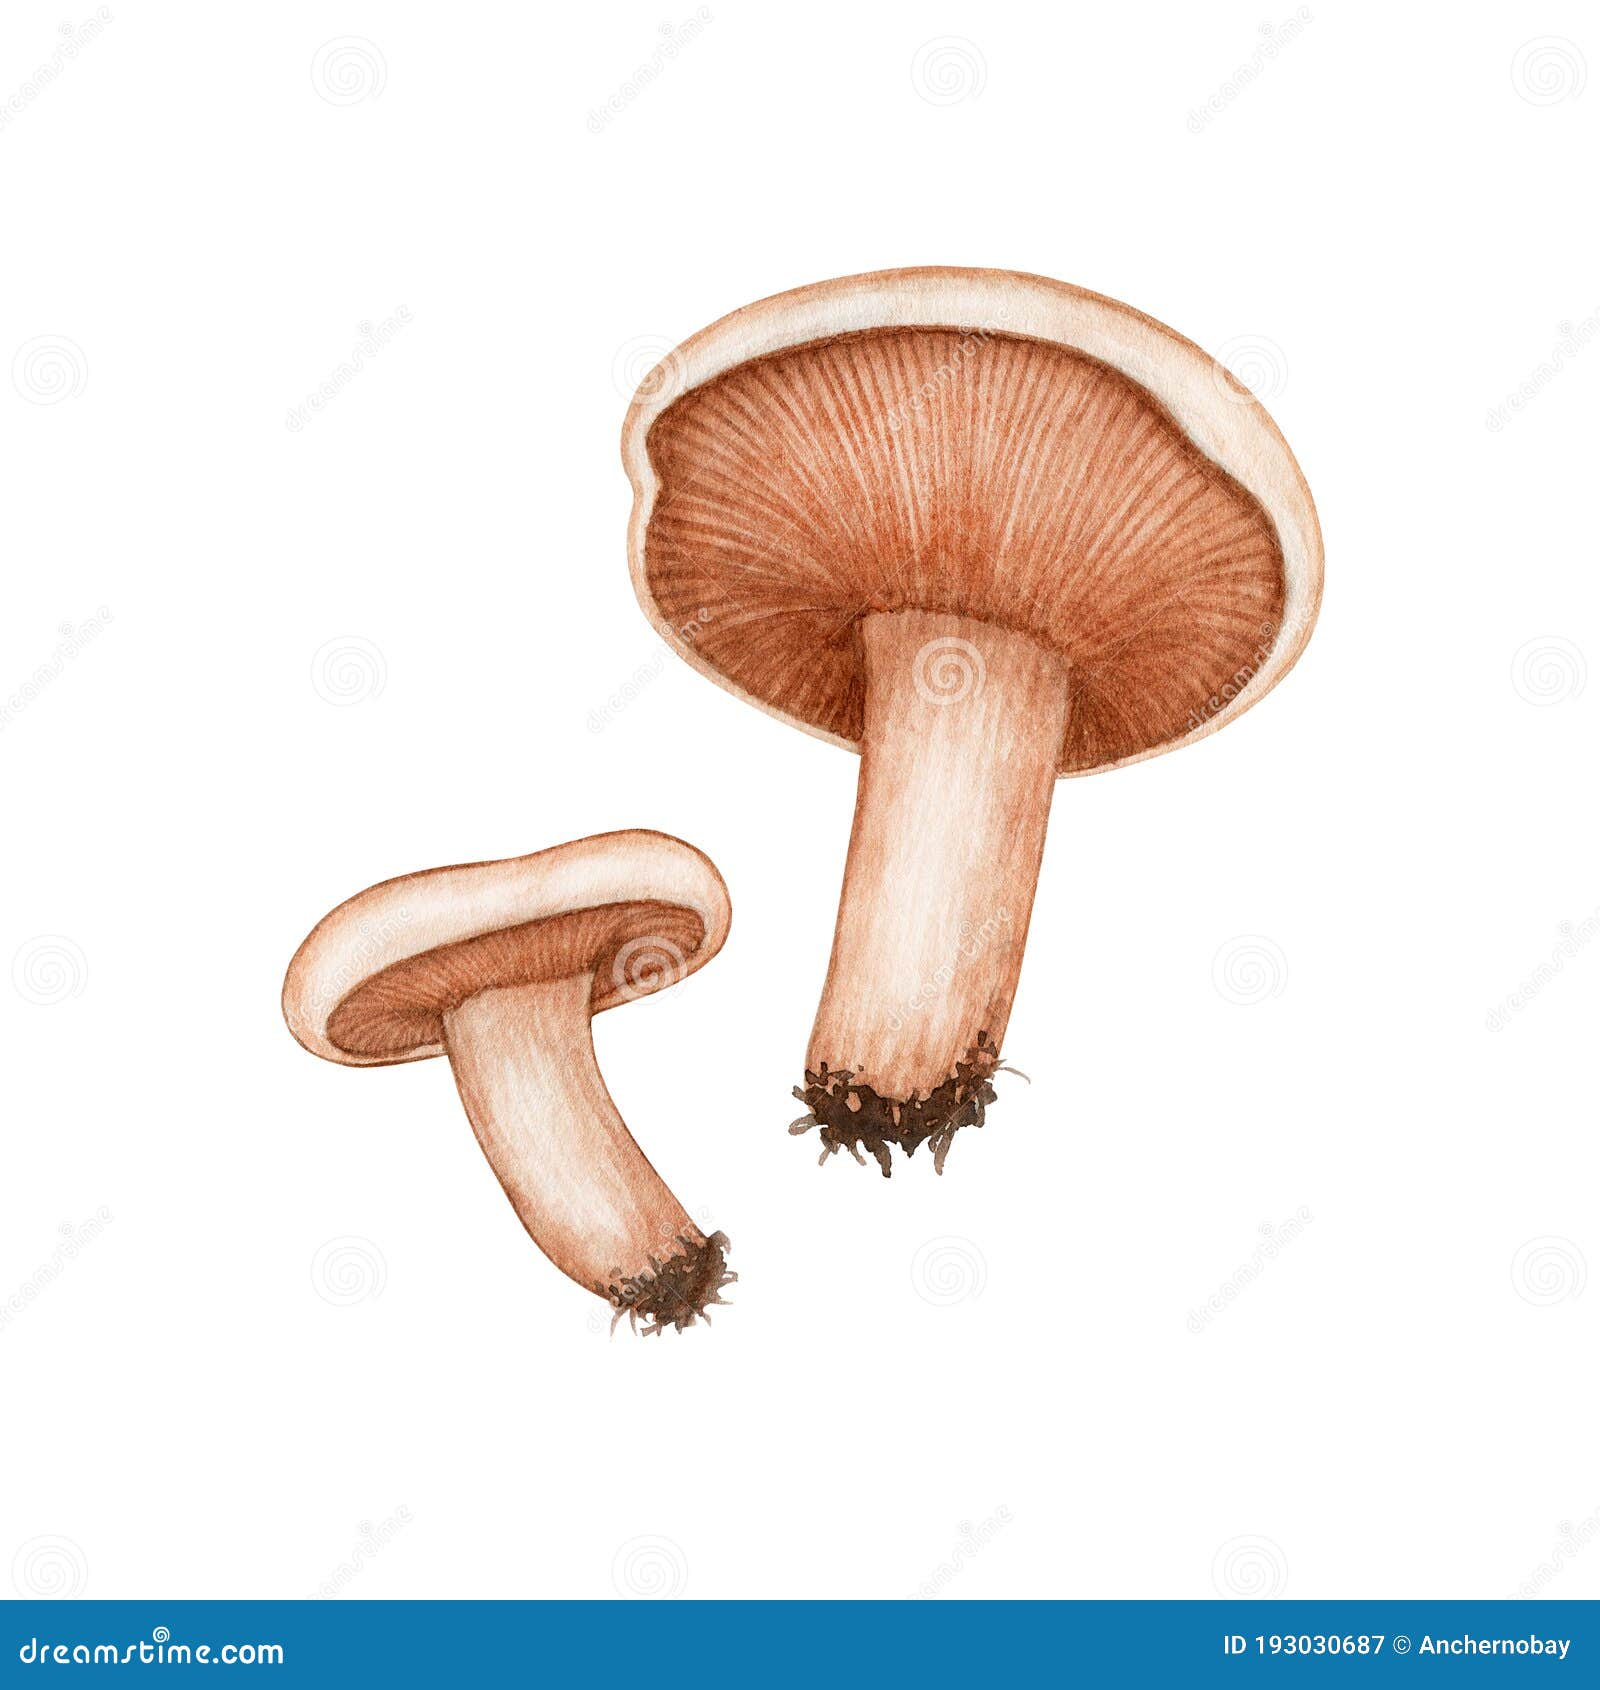 Set of Two Watercolor Raw Forest Edible Mushroom Russula/Lactarius ...